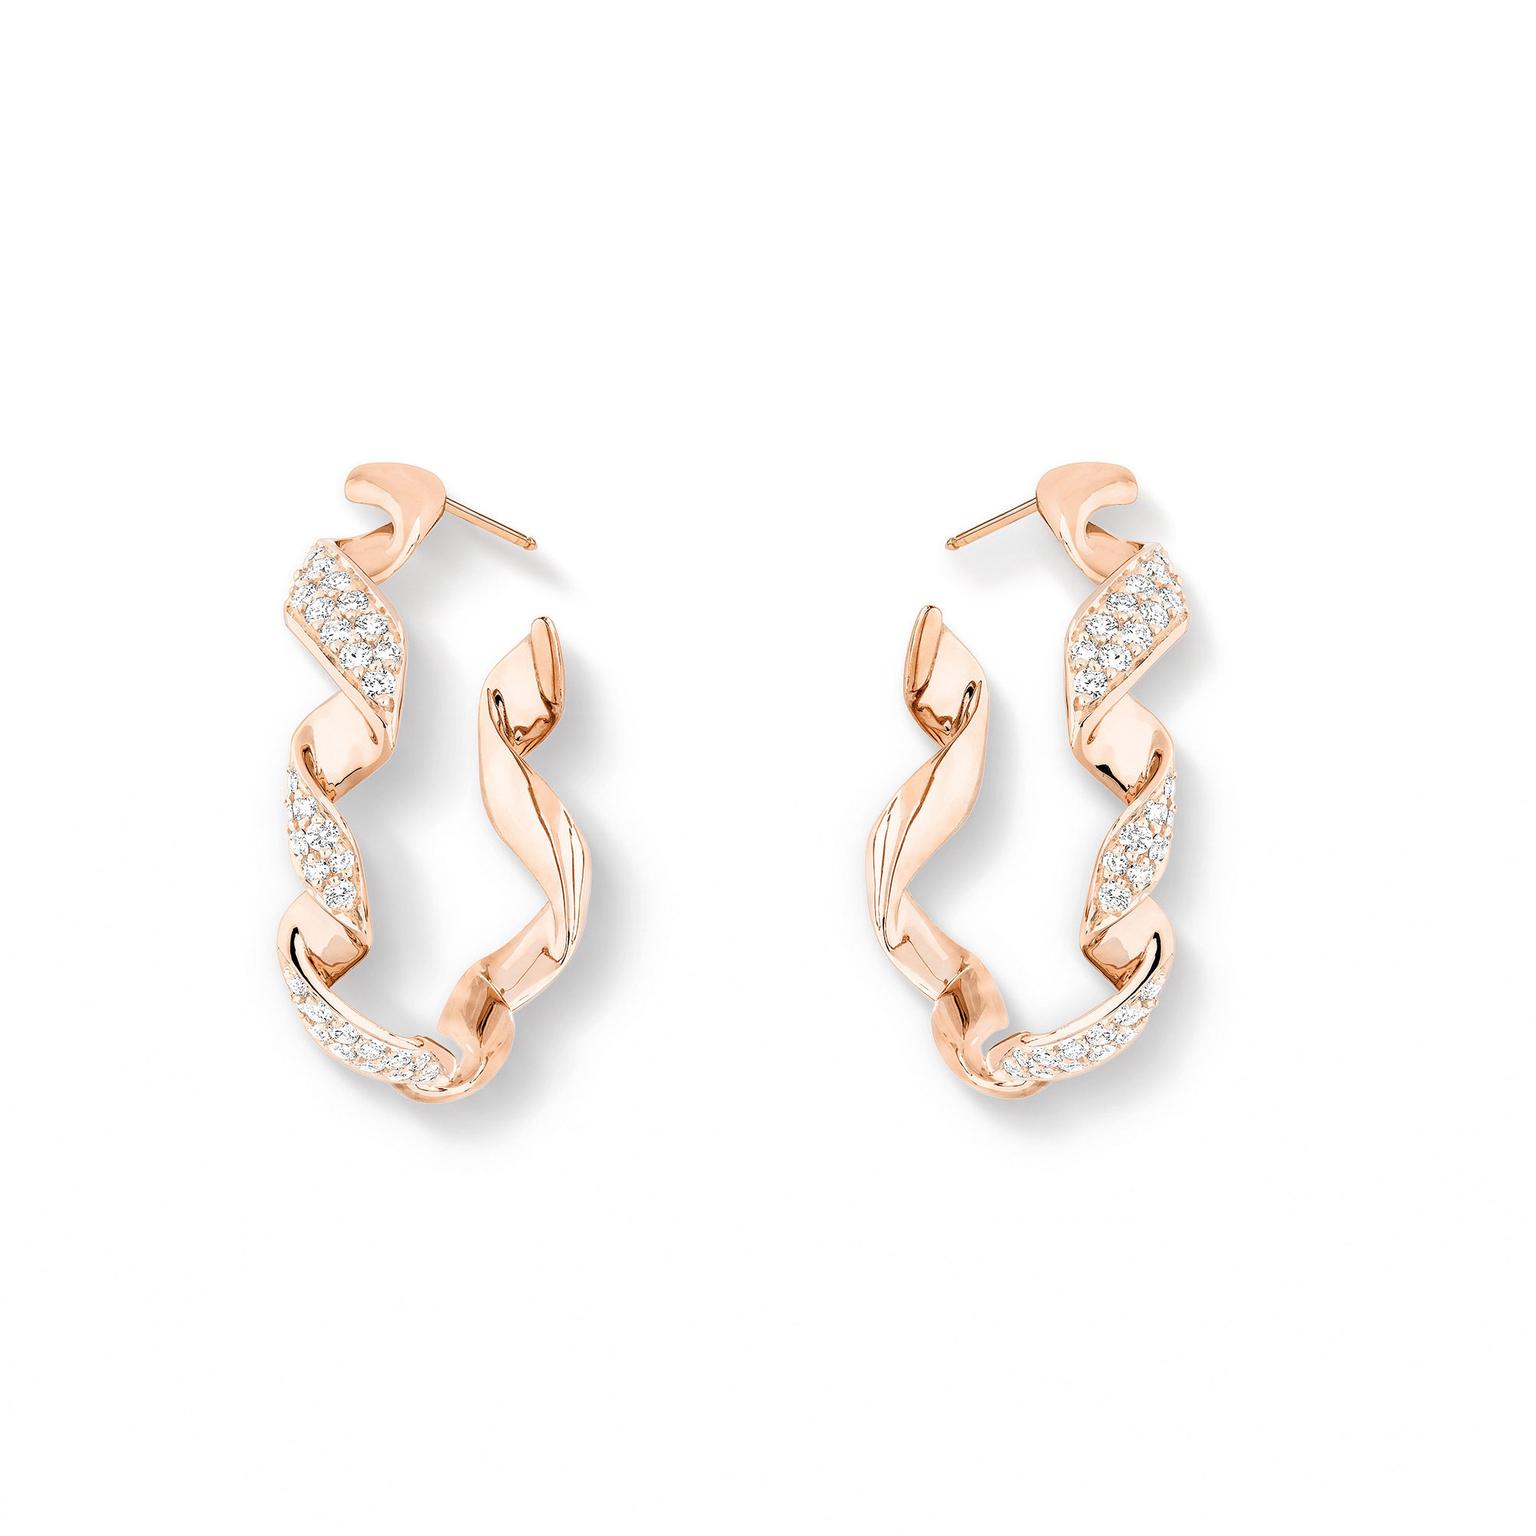 Dior Archi pink gold diamond earrings